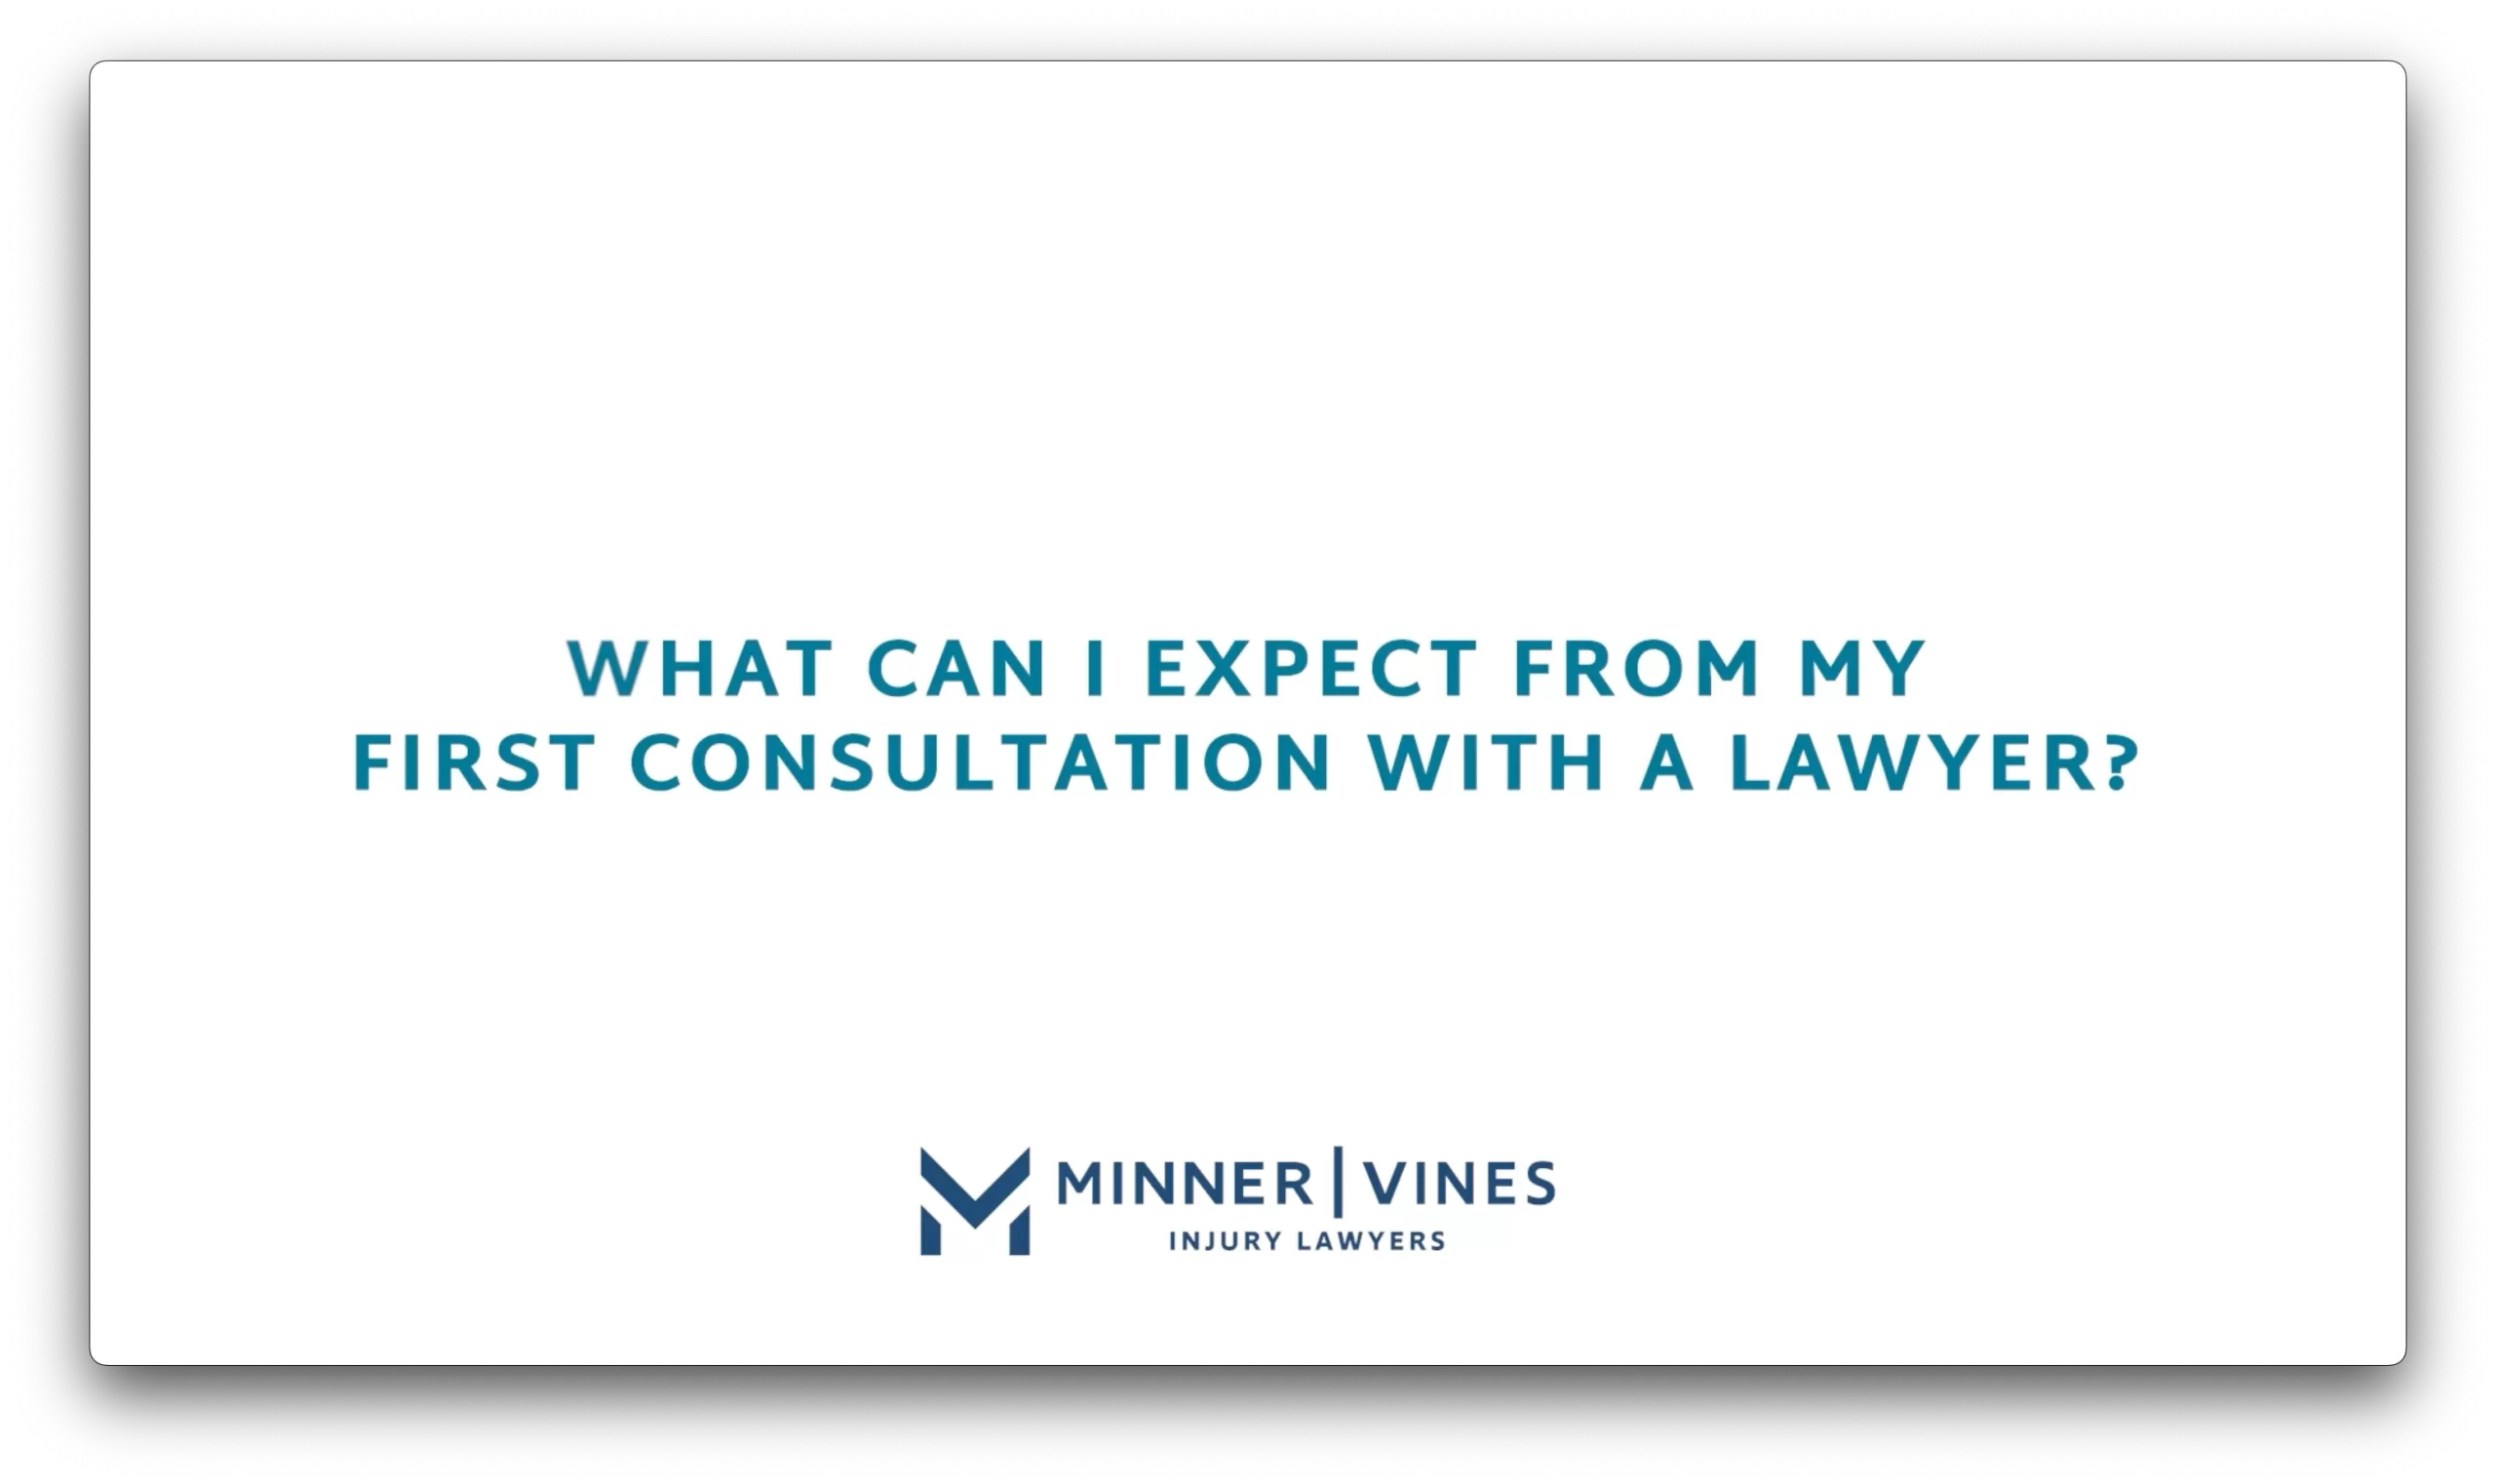 What can I expect from my first consultation with a lawyer?